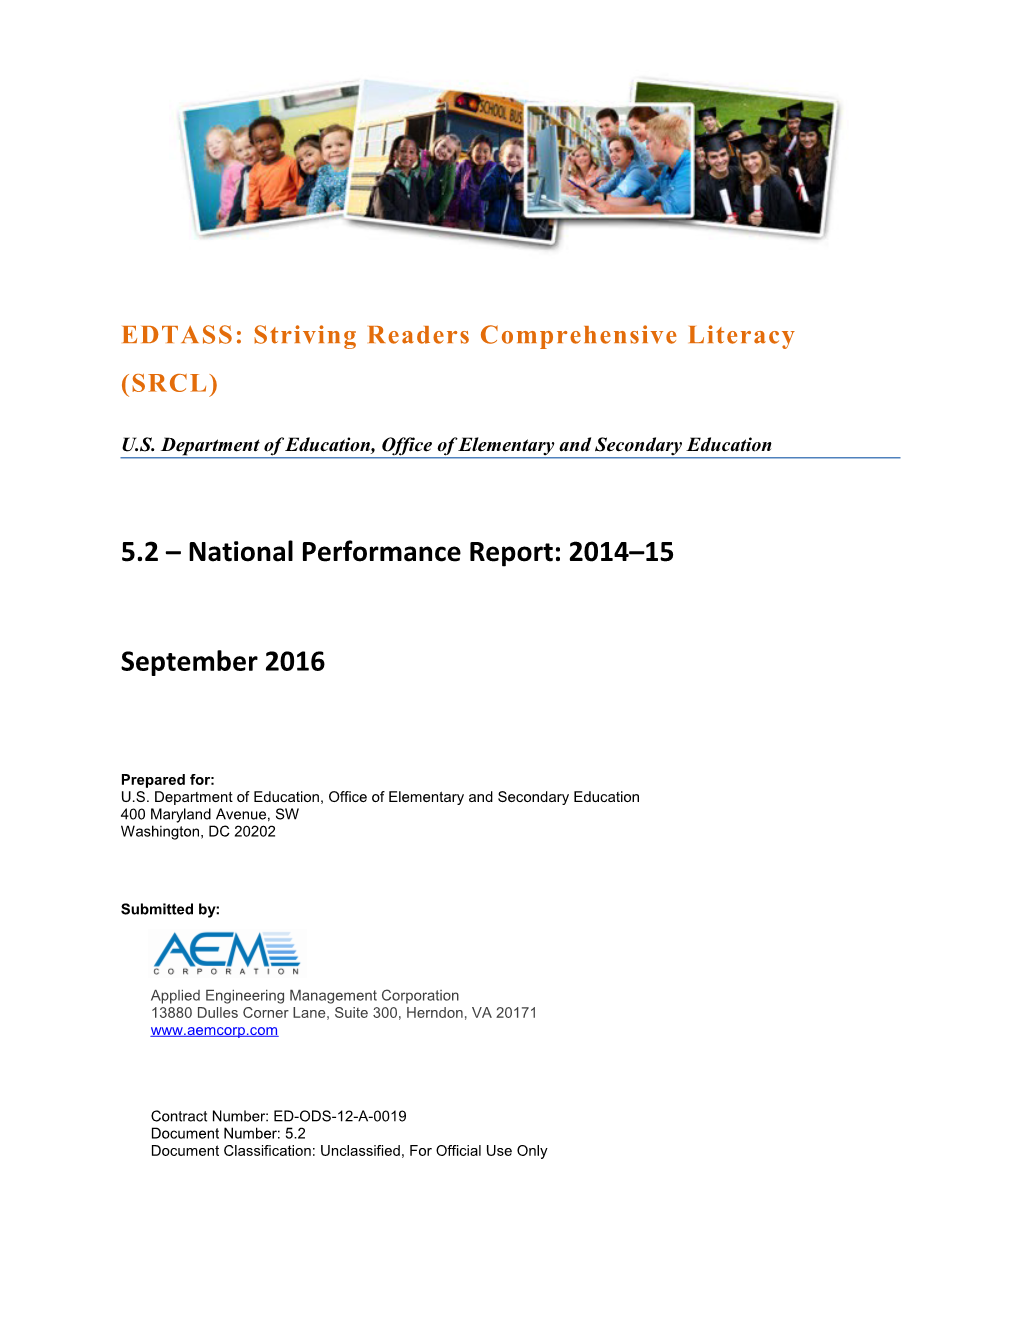 FY 2016 SRCL National Performance Report (MS Word)